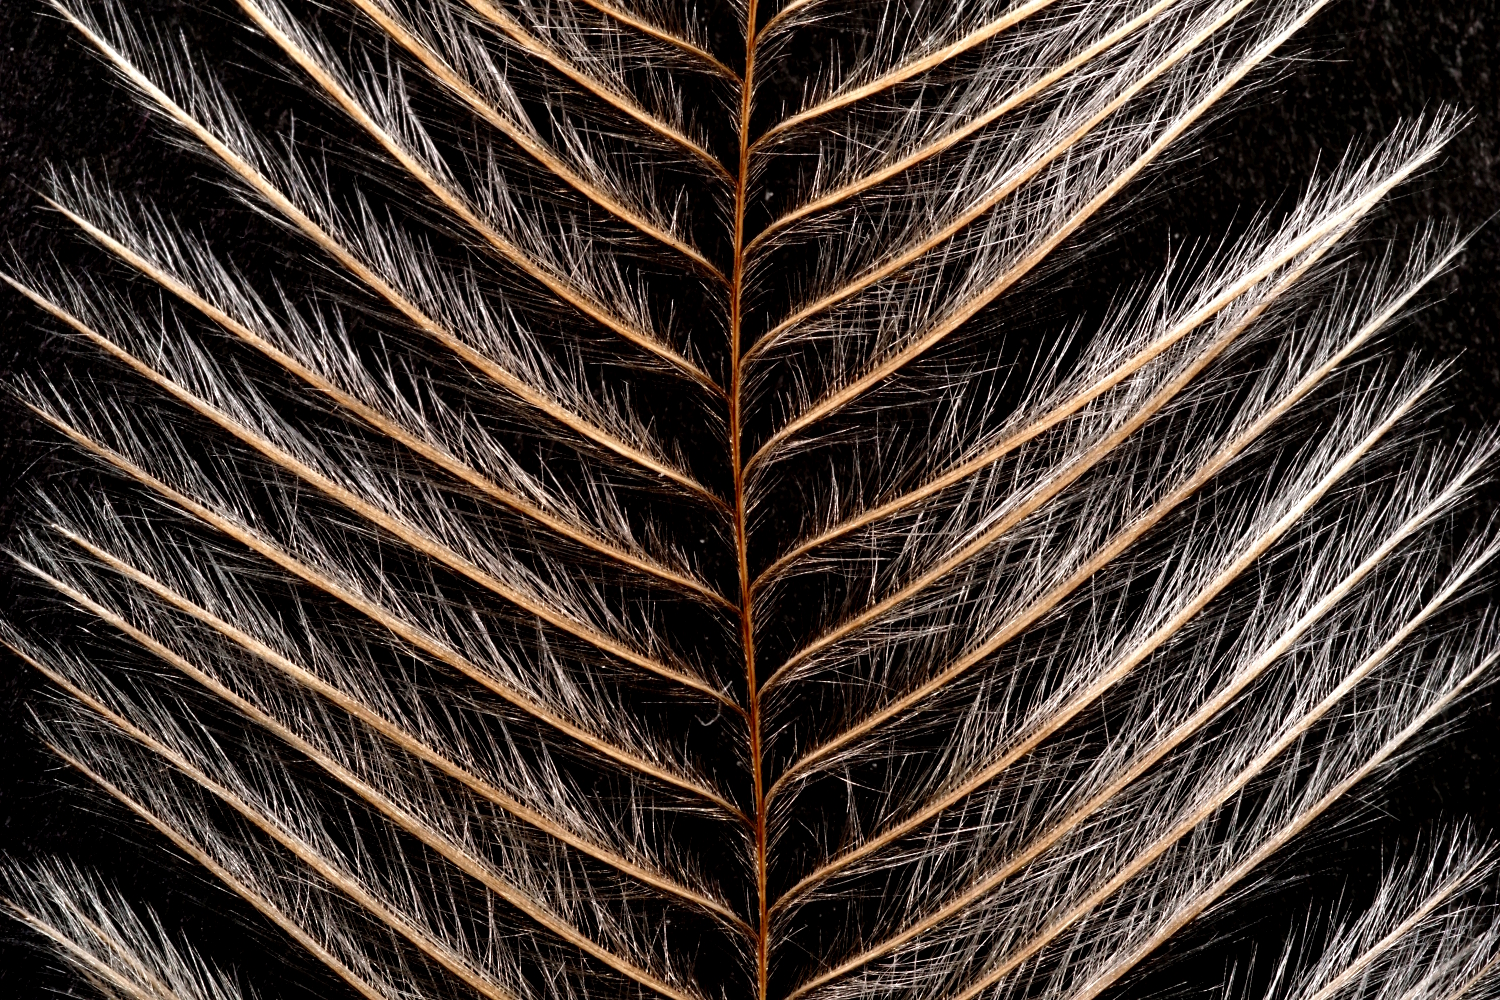 Emu feathers used in fly tying